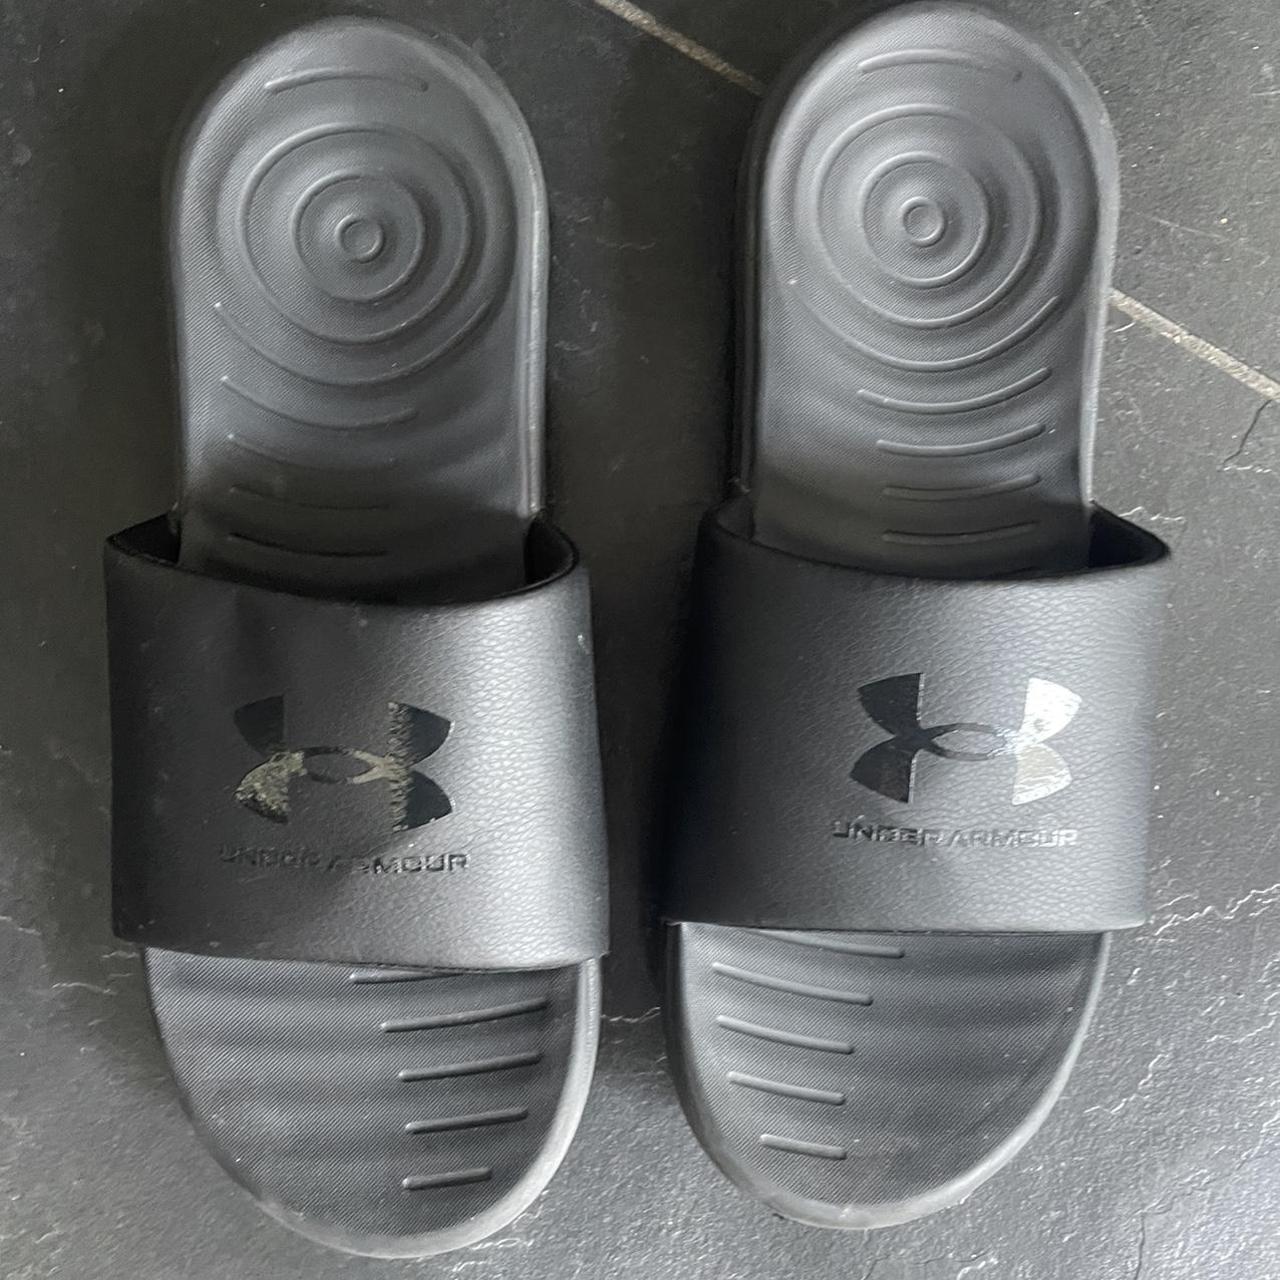 Under armour sliders Uk 11 Great condition Taking... - Depop